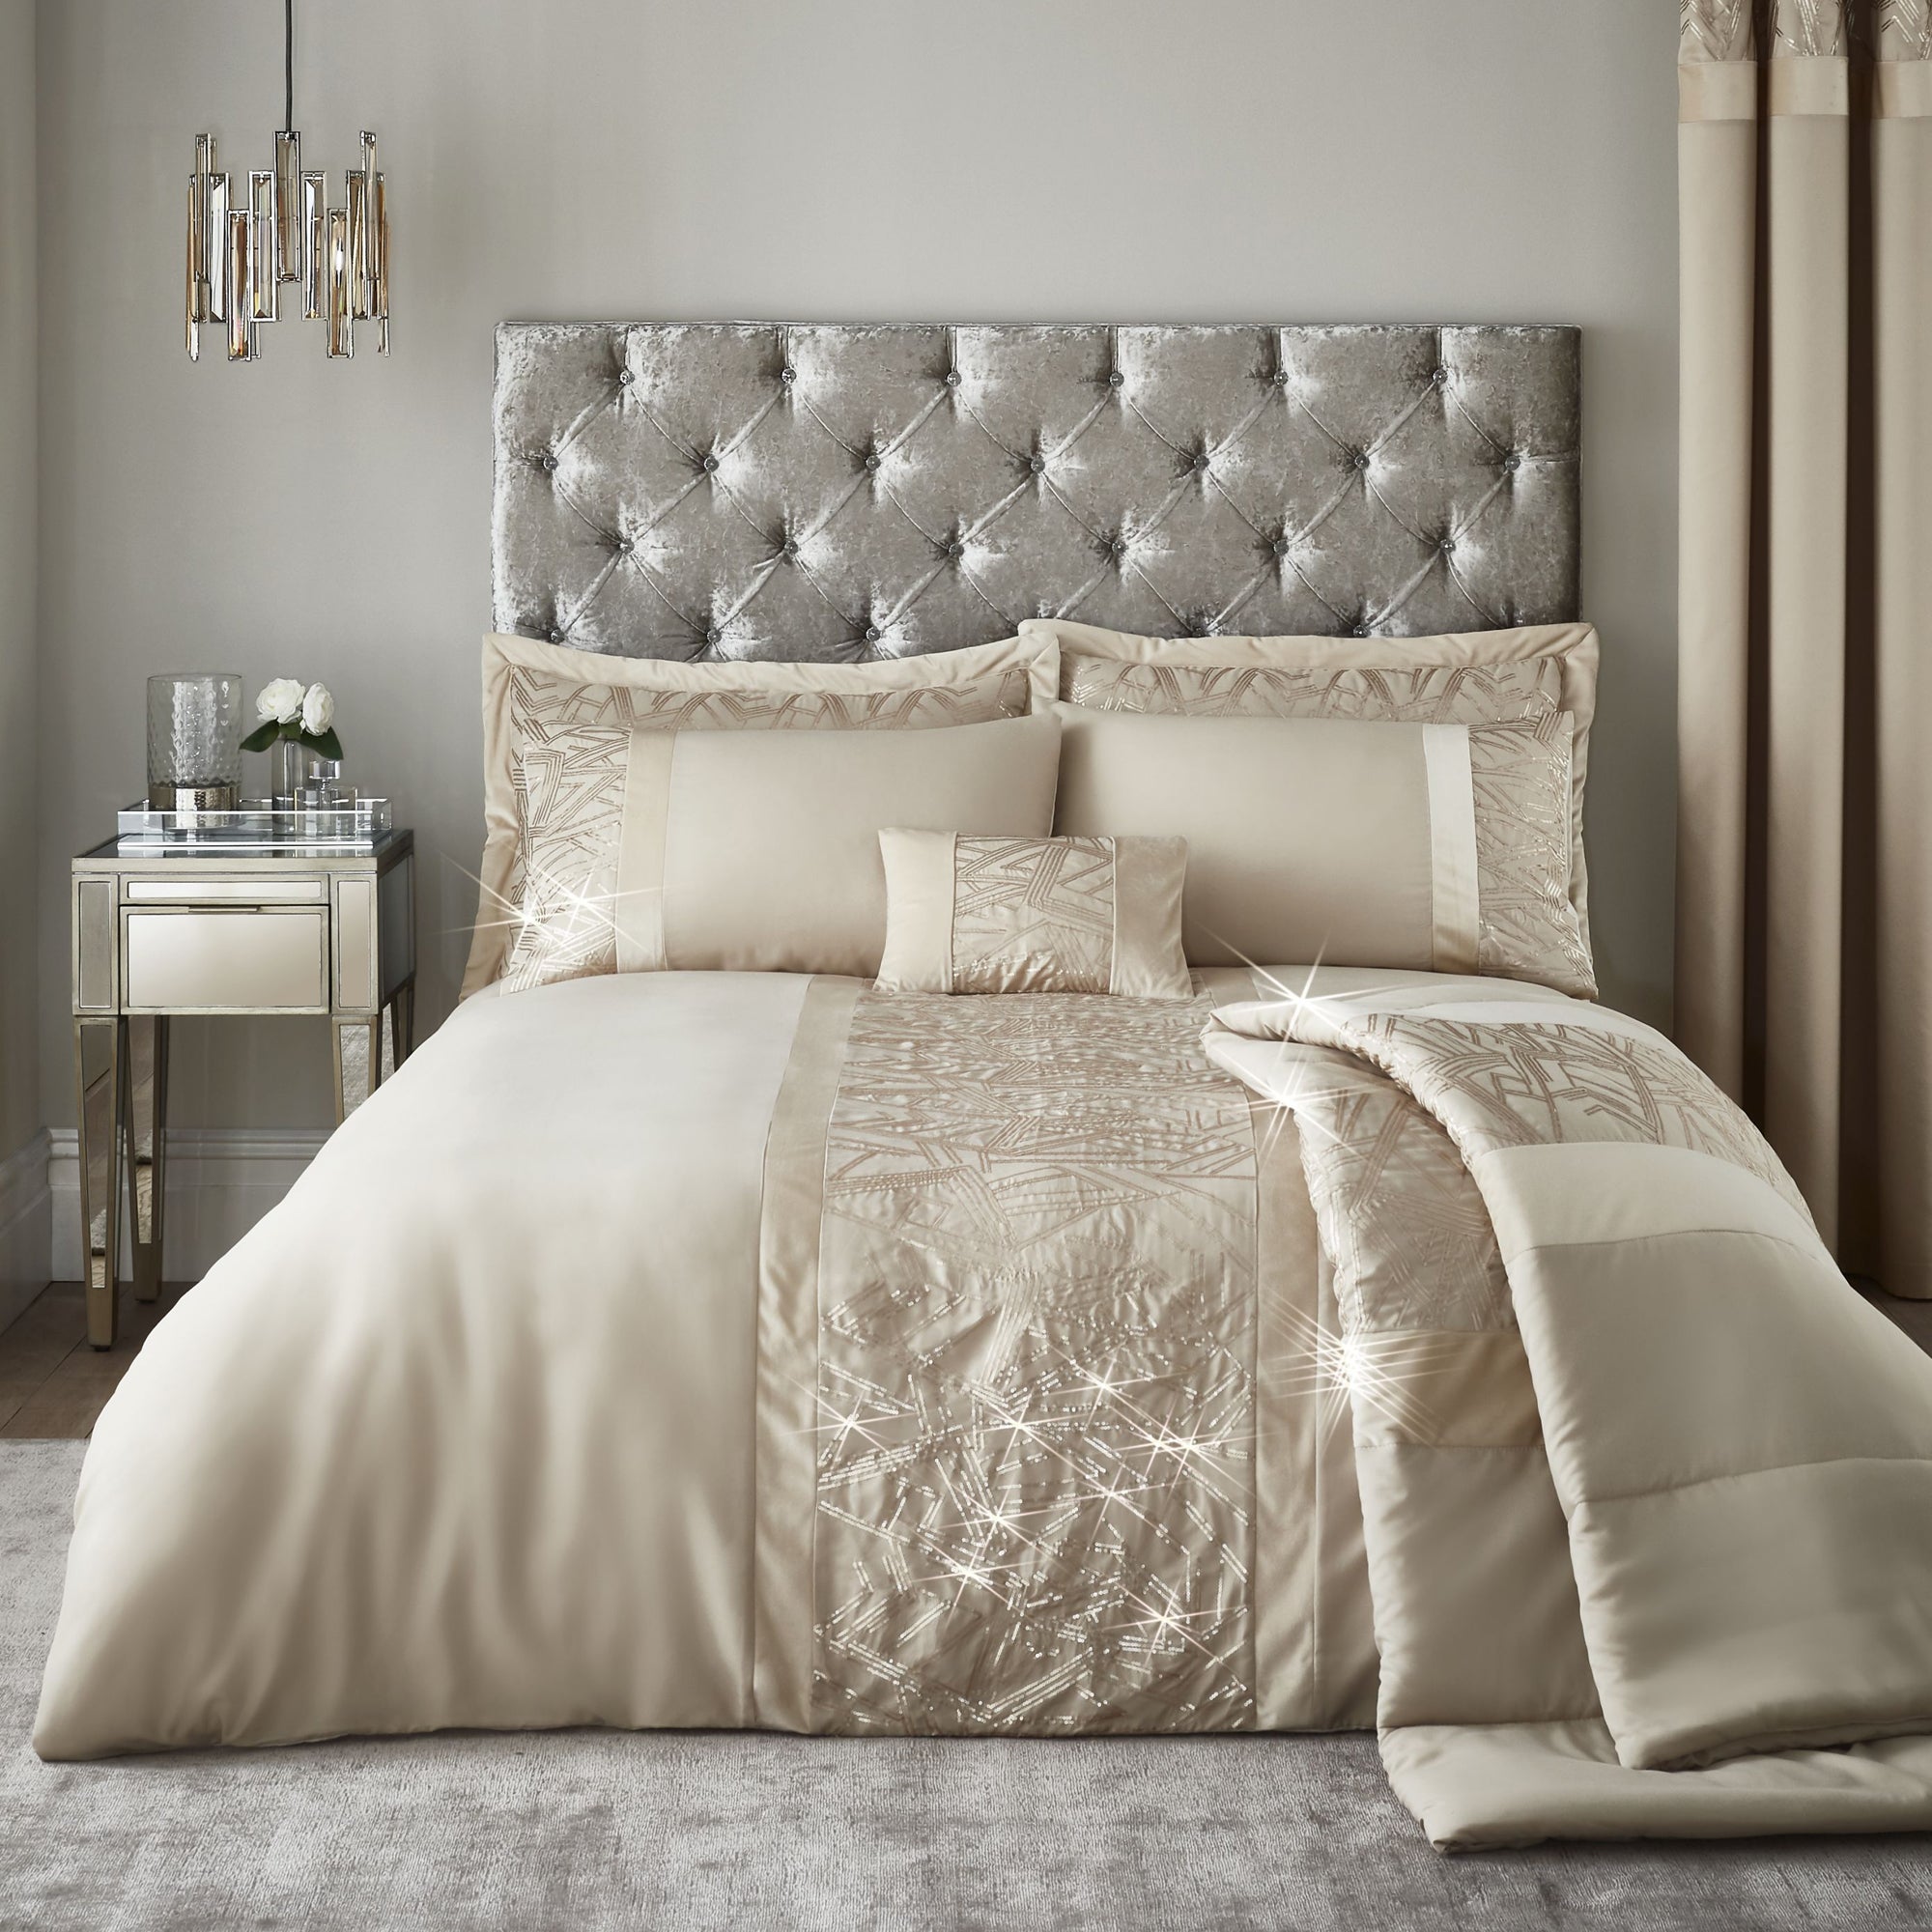 Catherine Lansfield Sequin Cluster Blush Luxury Duvet Cover Set or